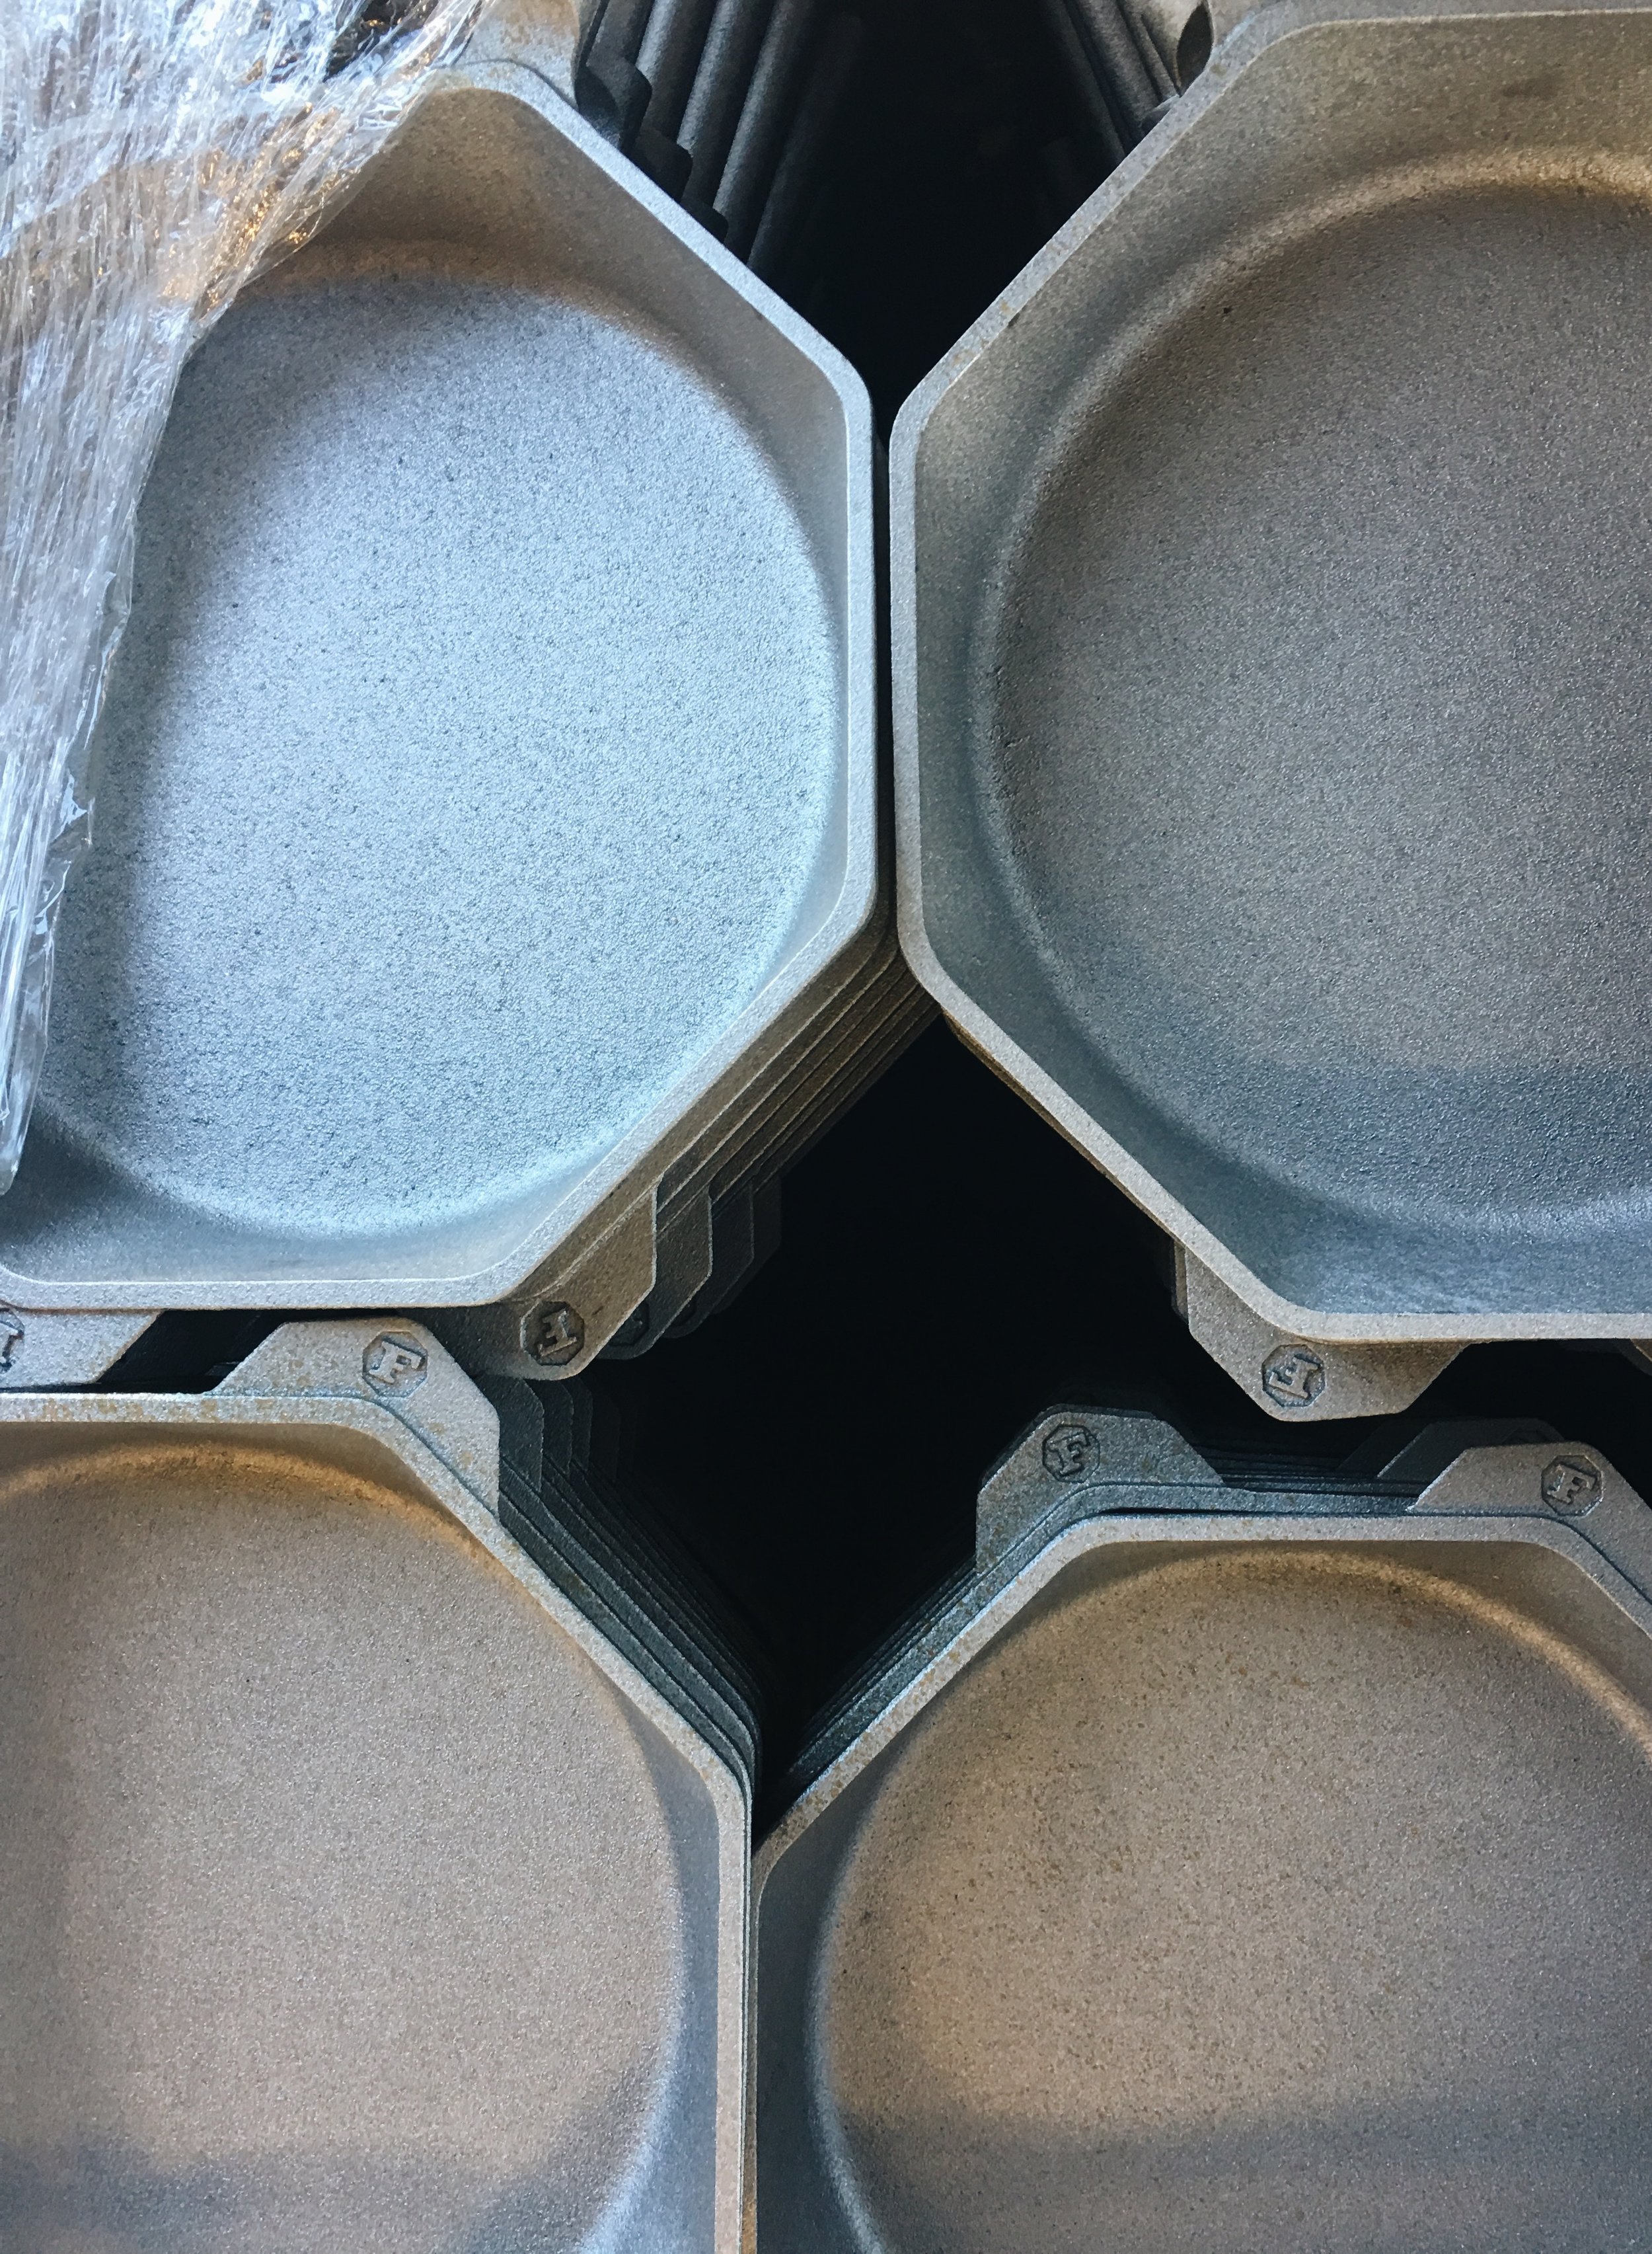  Finex pans waiting to be polished, seasoned, and assembled. 